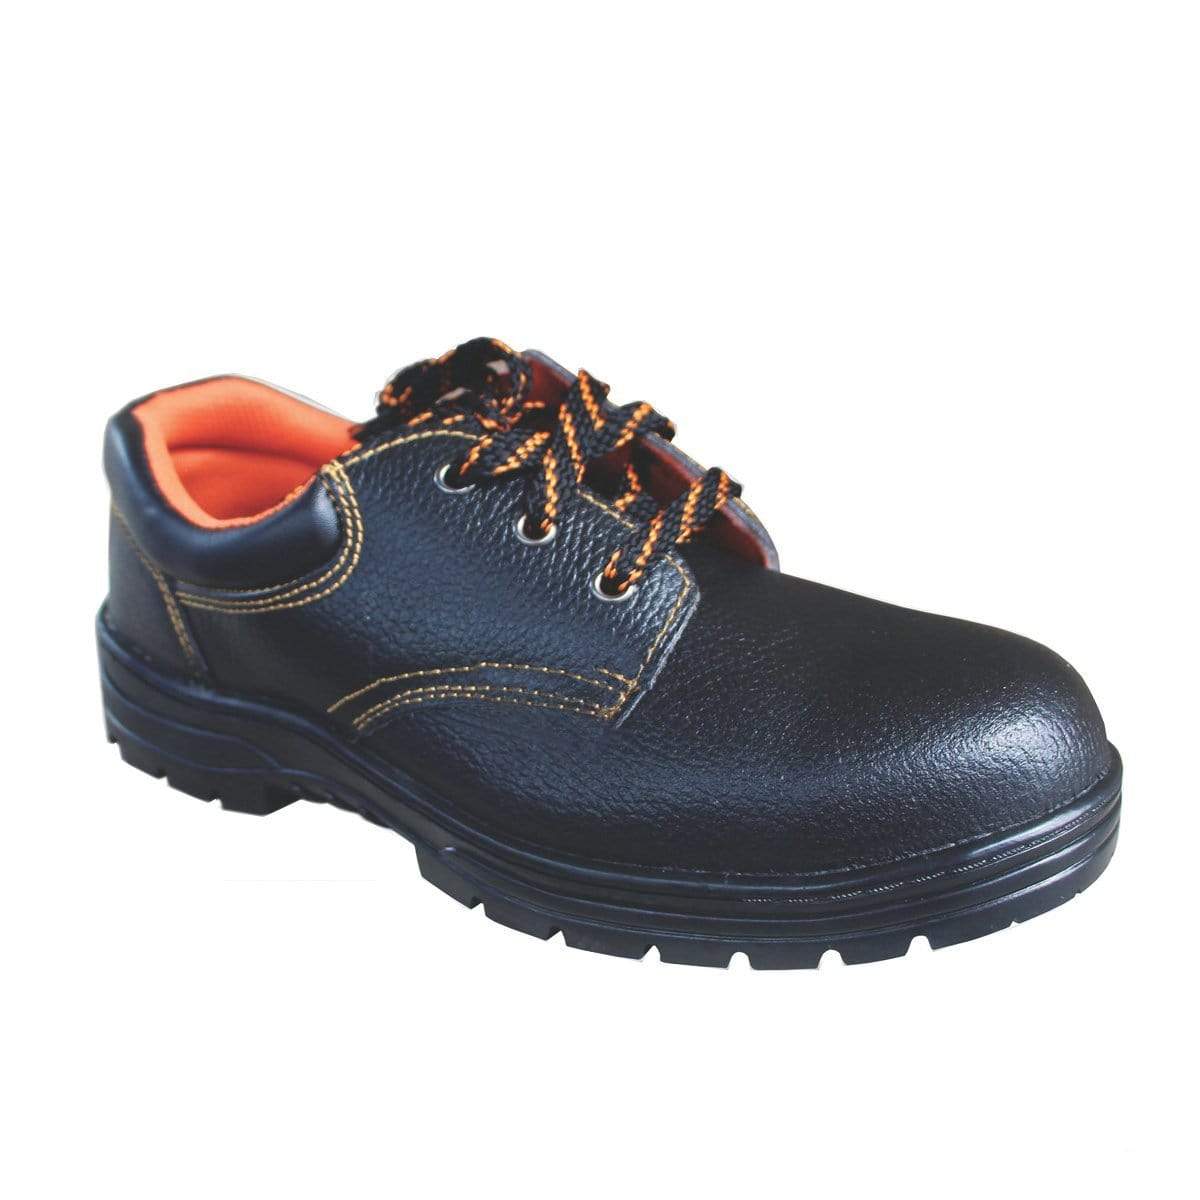 ANEKA Worker Safety Shoes Safety Boots Steel Toe Cap Kasut UK8 1000#